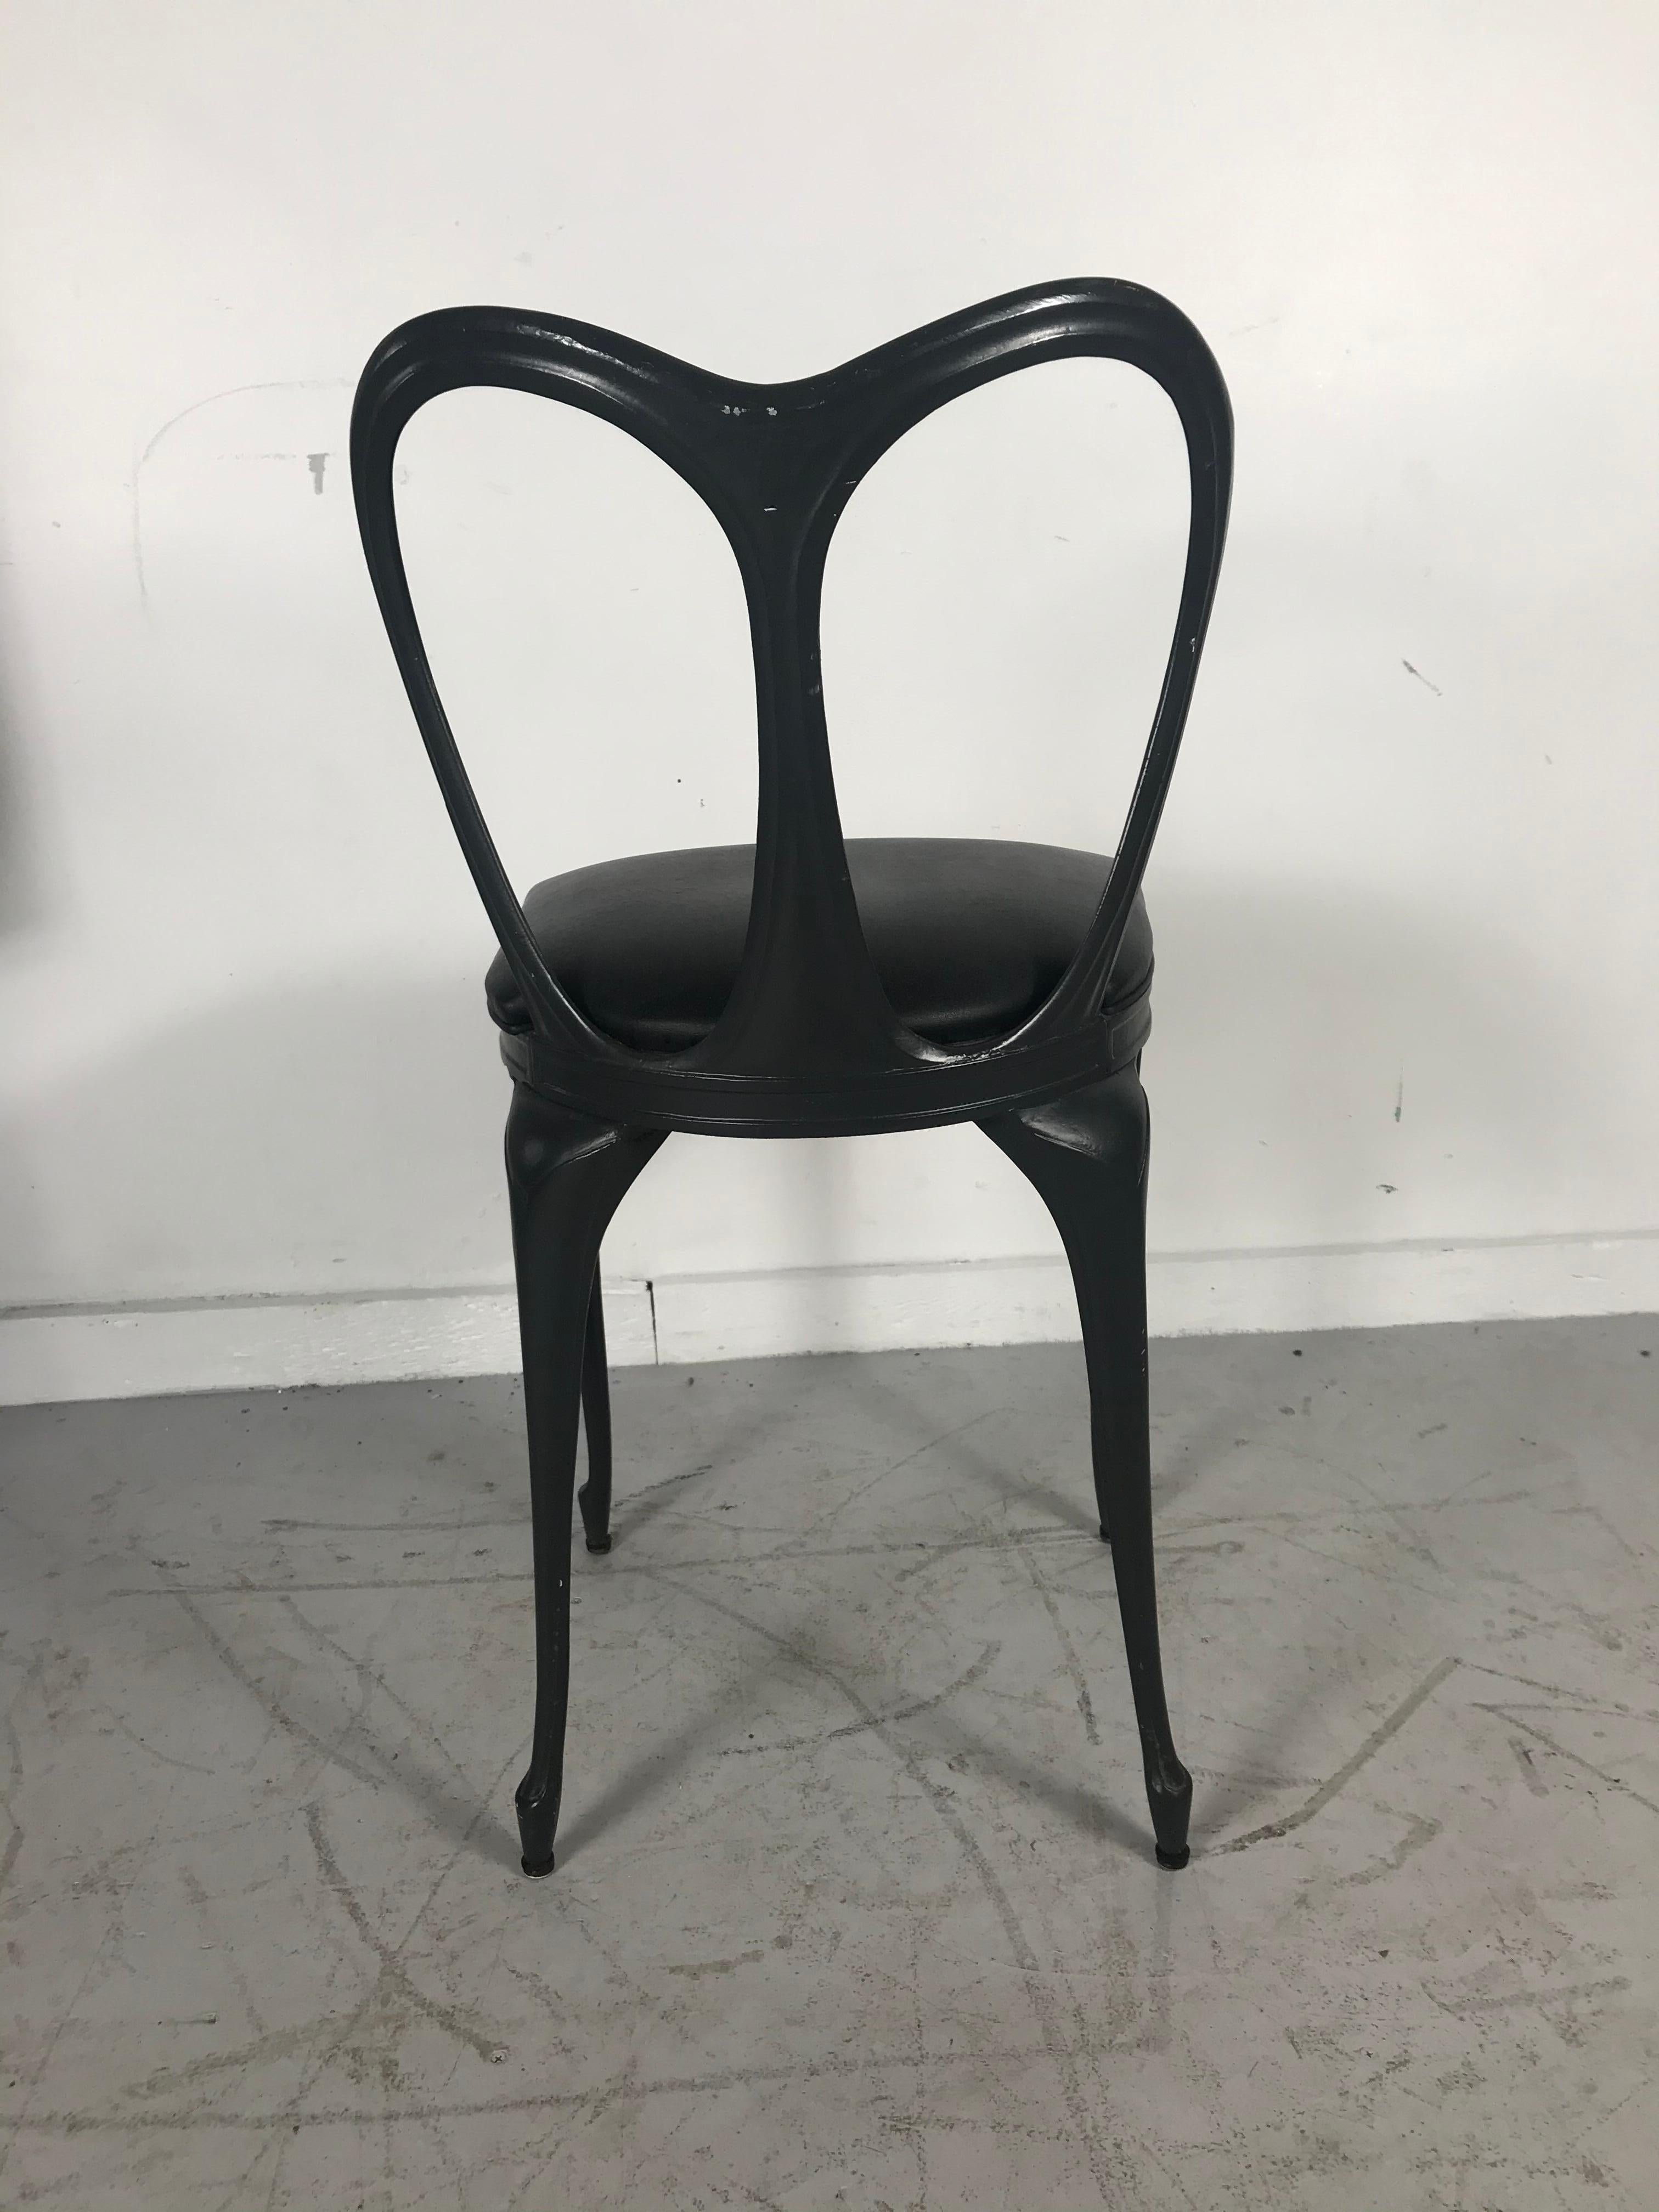 American Art Nouveau Style Cast Aluminum Chair by Crucible Products Corp. 1960